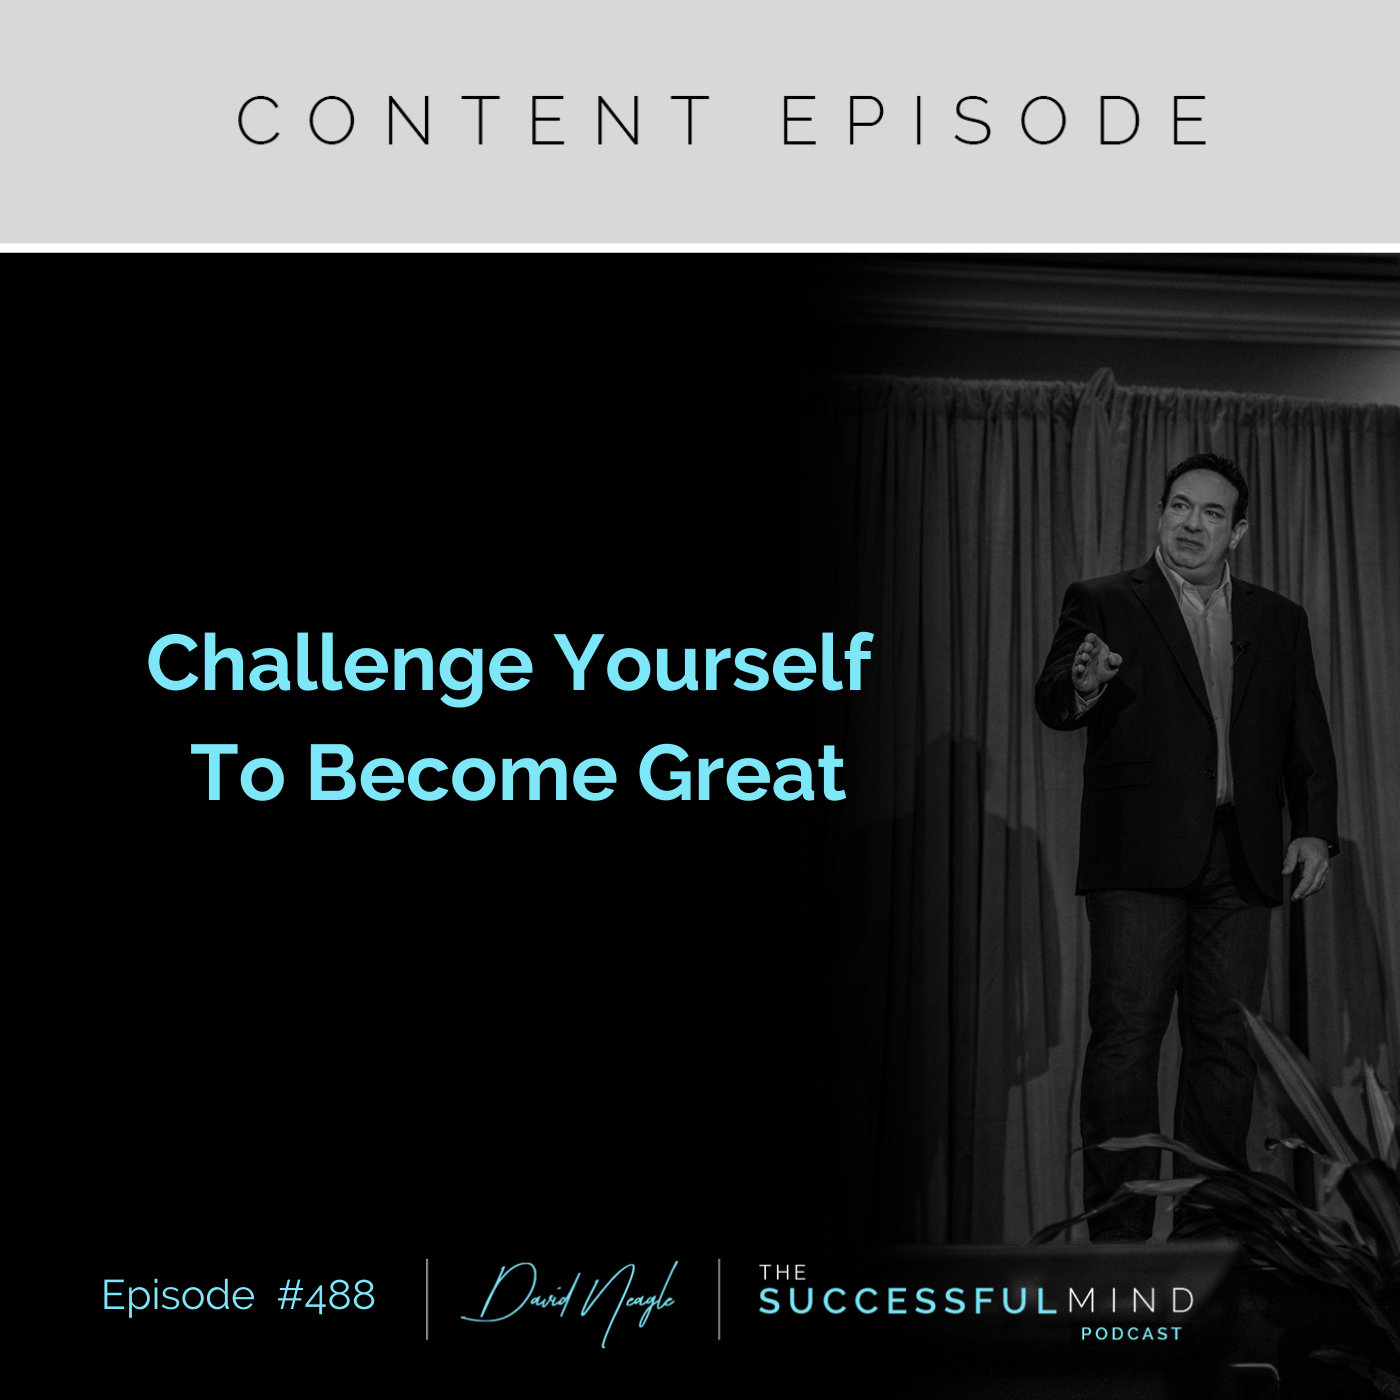 The Successful Mind Podcast – Episode 488 – Challenge Yourself To Become Great